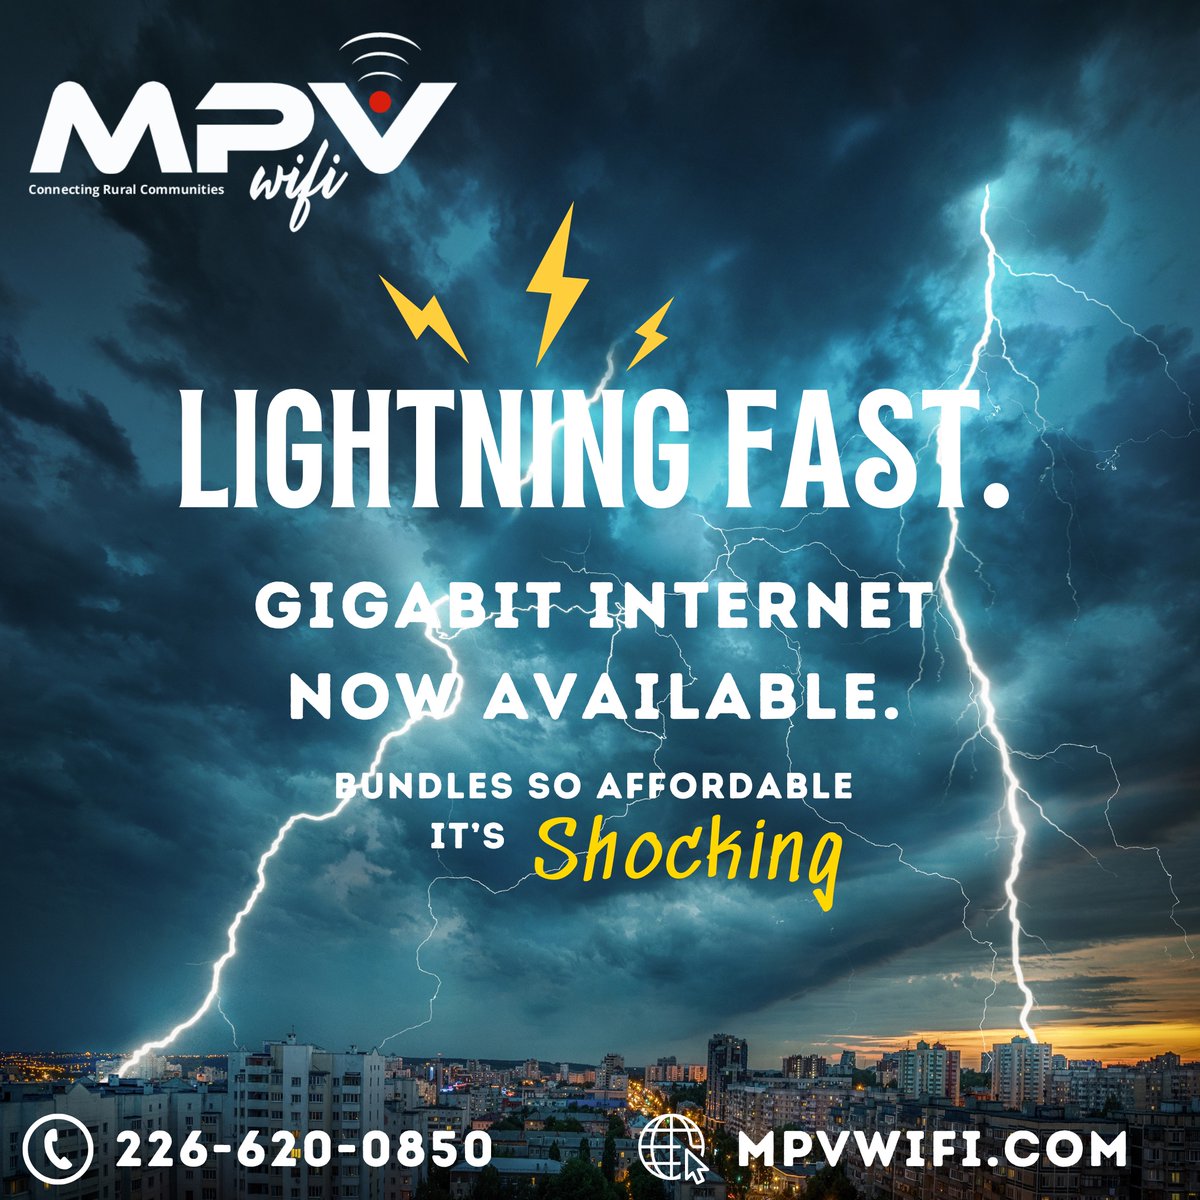 Serious speed now available with MPV Wifi. Internet up to 1 Gbps now available in Chatham and Sarnia. #gig #speed #mpvwifi